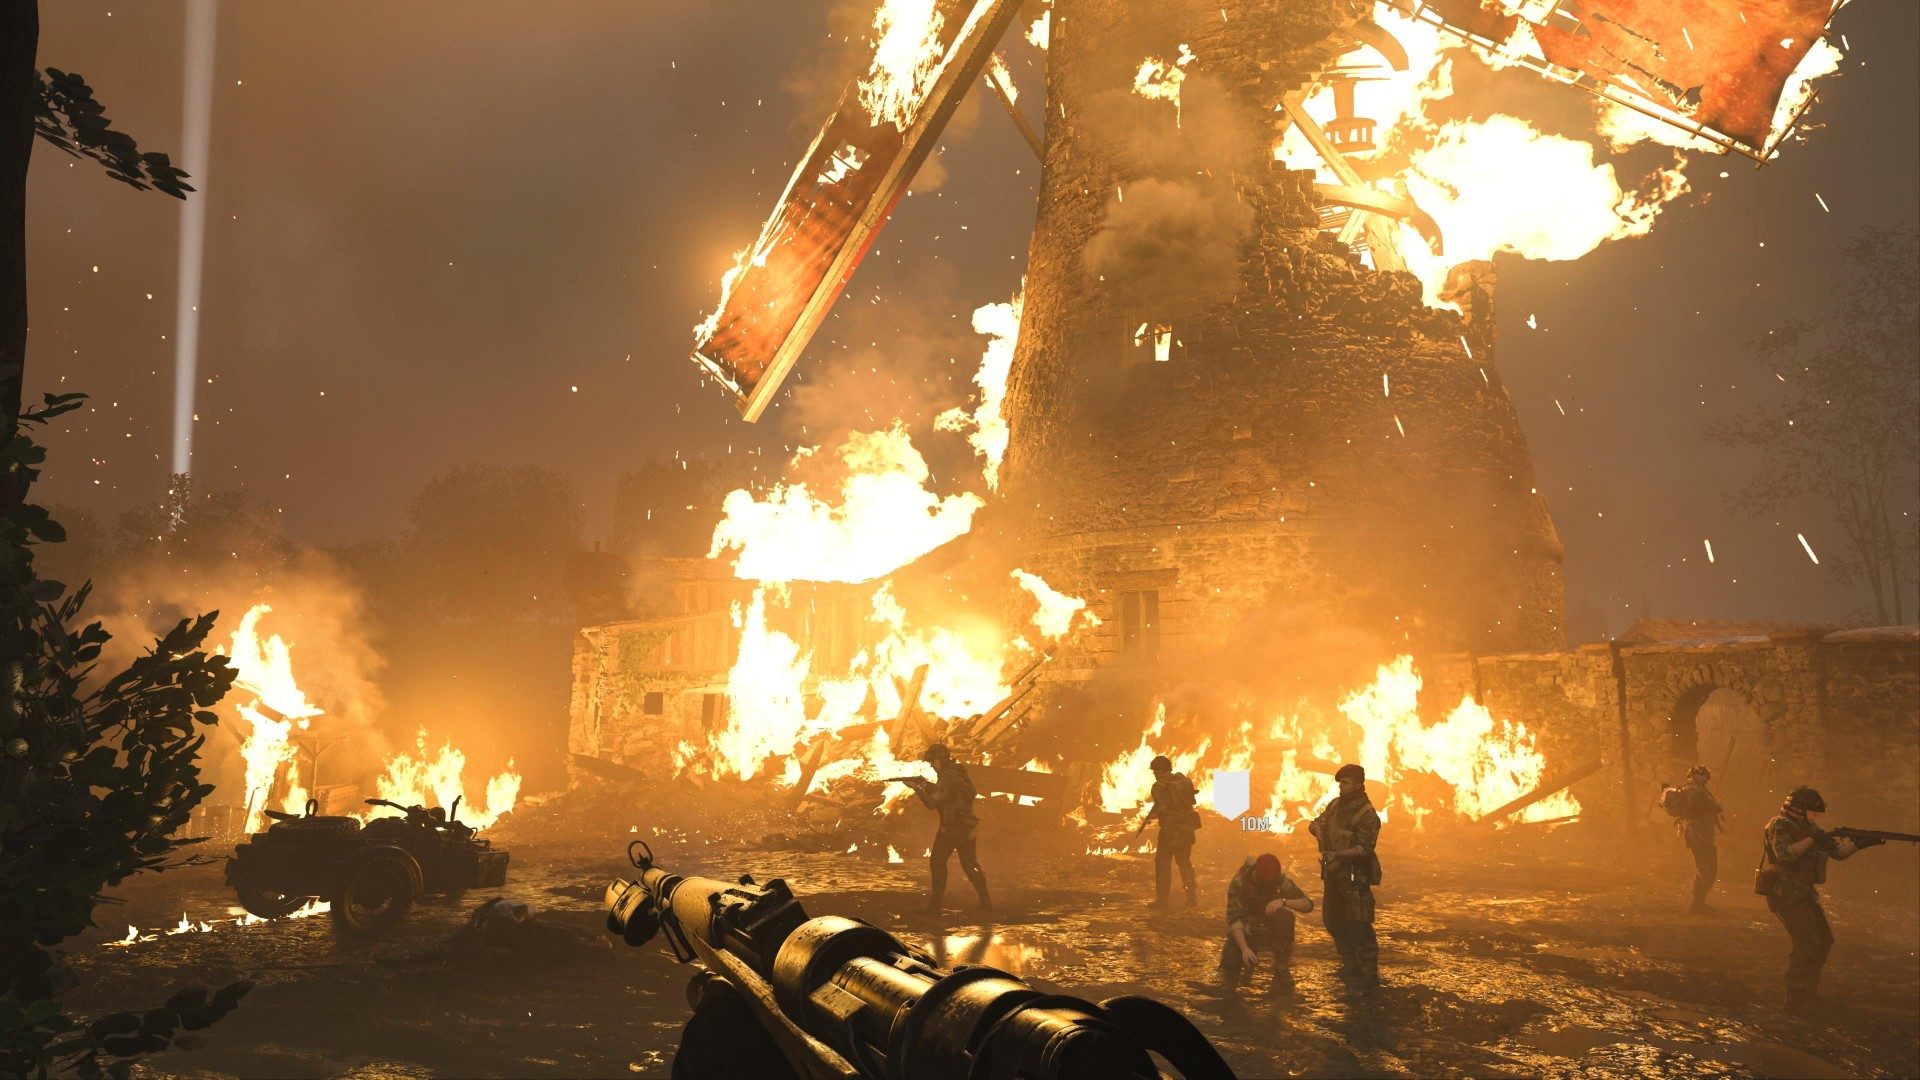 Quick review: 'Call of Duty Vanguard' campaign has a strong cast and  impressive graphics